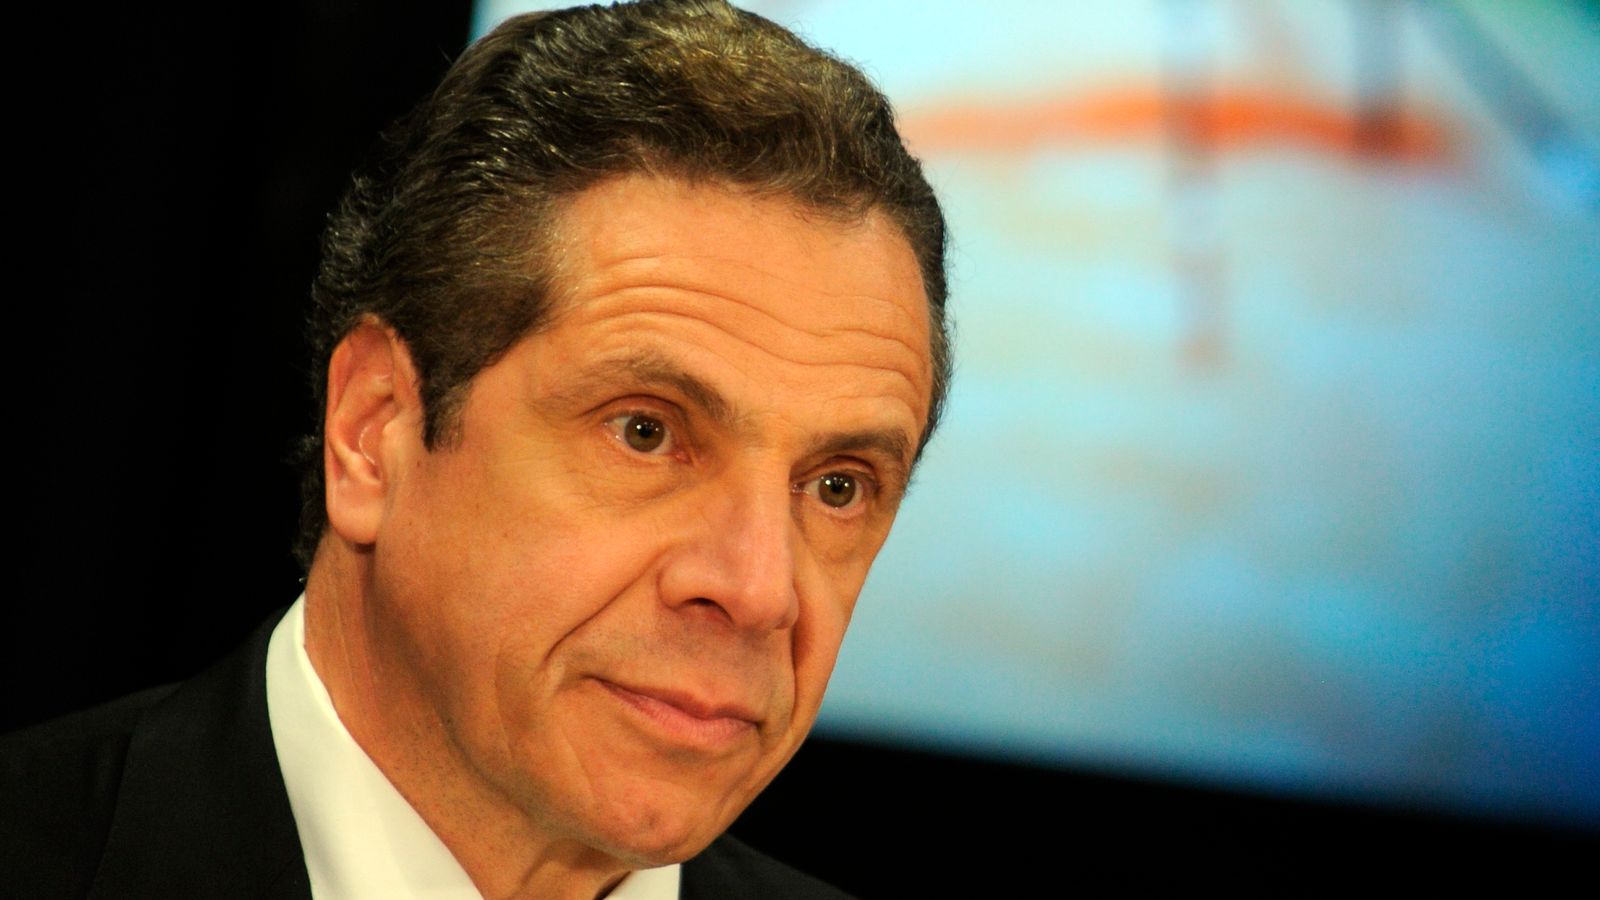 New York governor Andrew Cuomo reported to police over groping ...